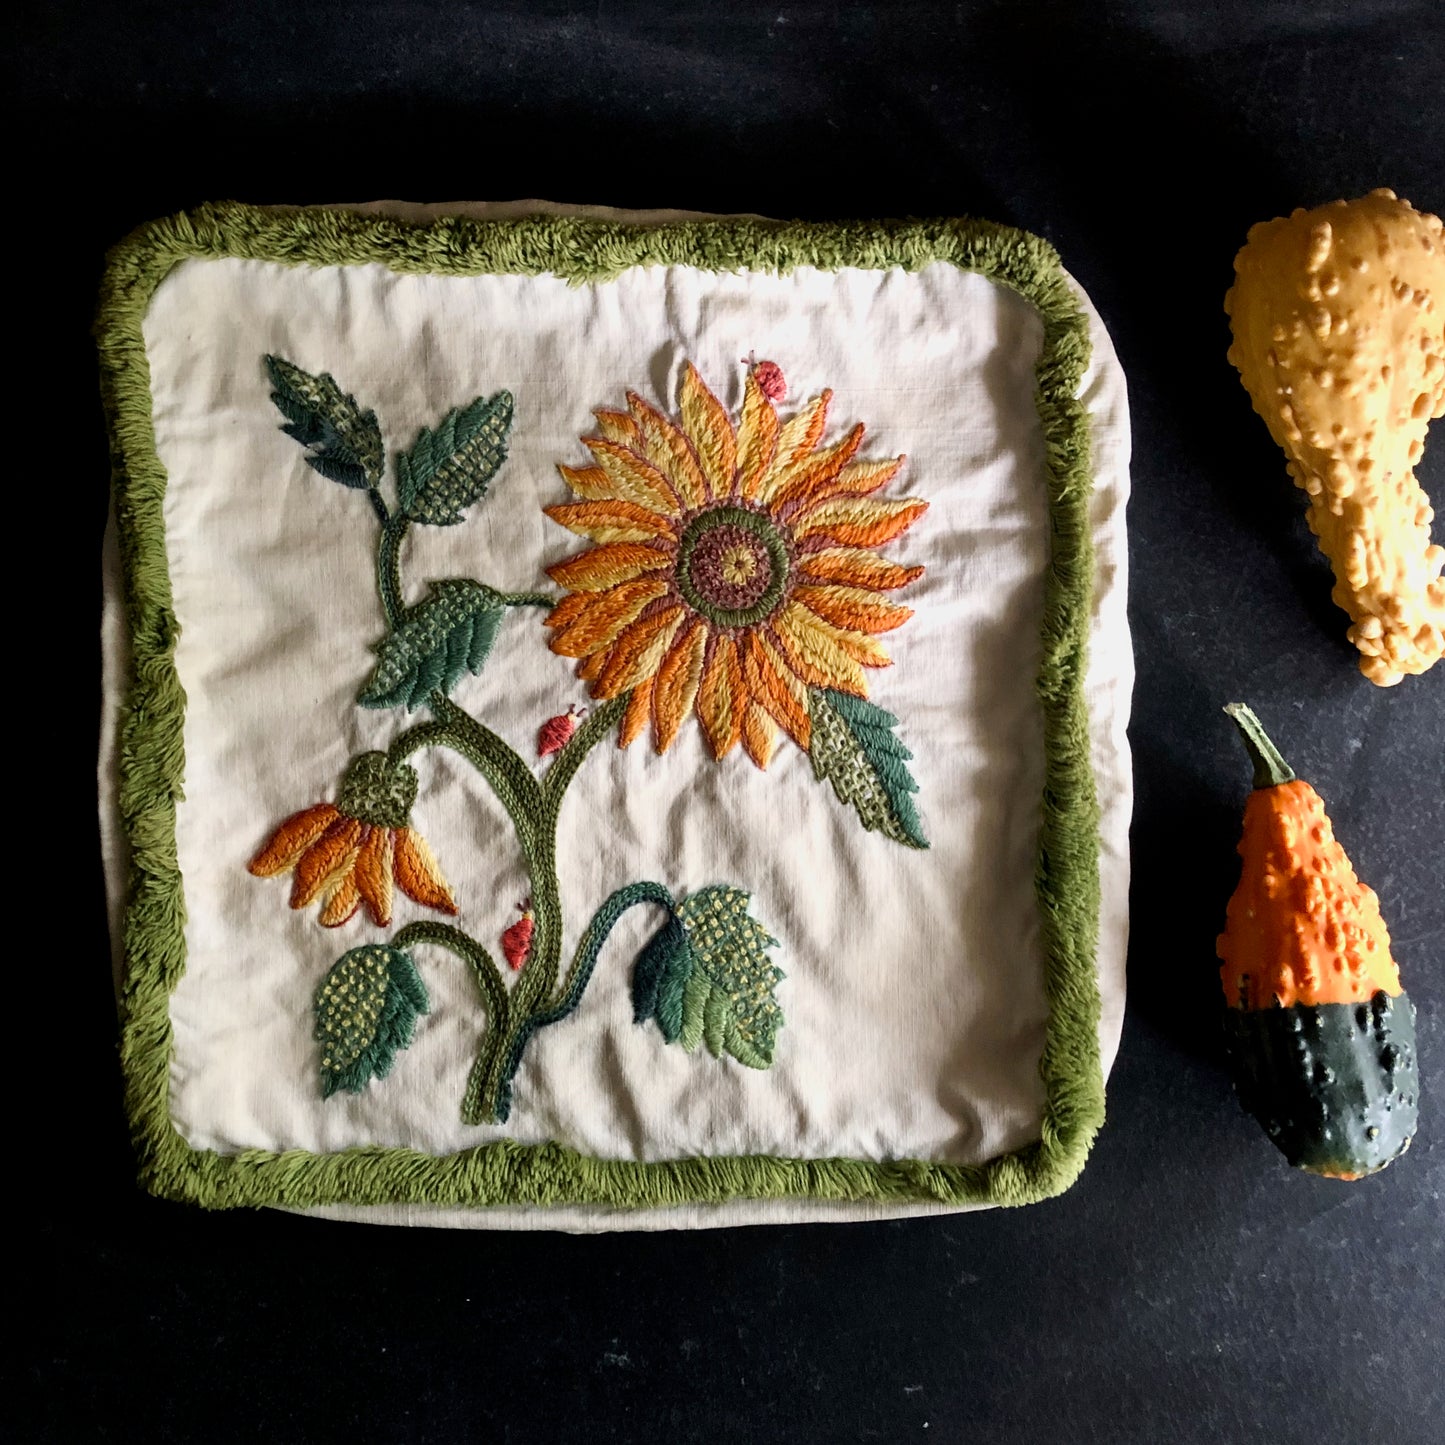 Vintage Embroidered Fall Pillow Covers, Set of 2 (c.1960s)